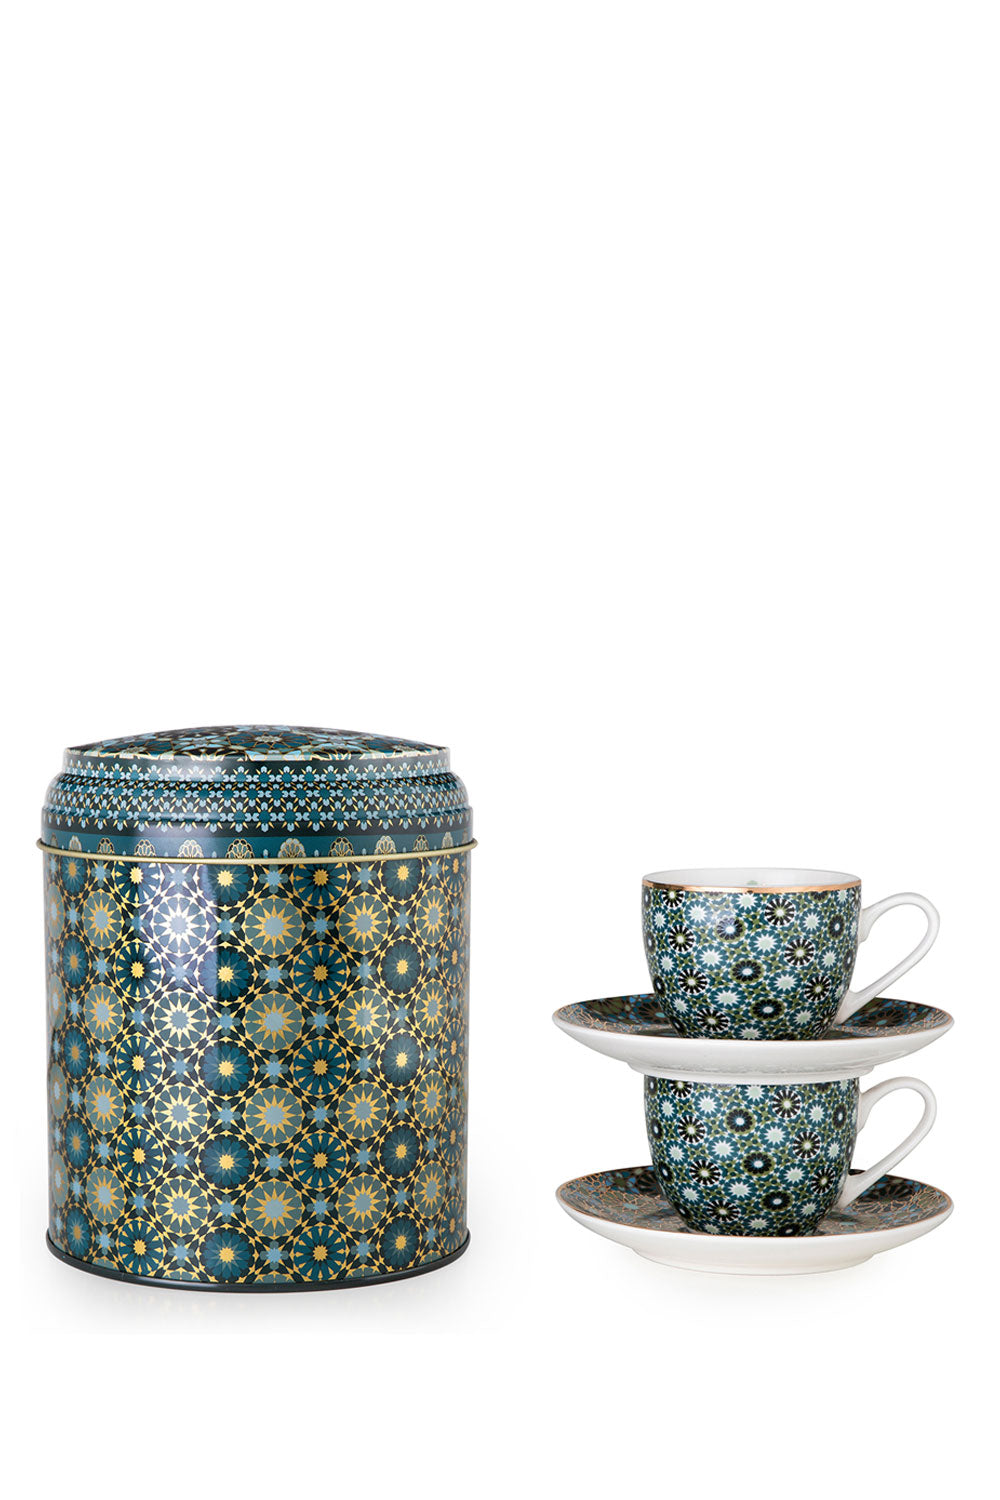 Andalusia Tin Box With 2 Cups And Saucer - Maison7